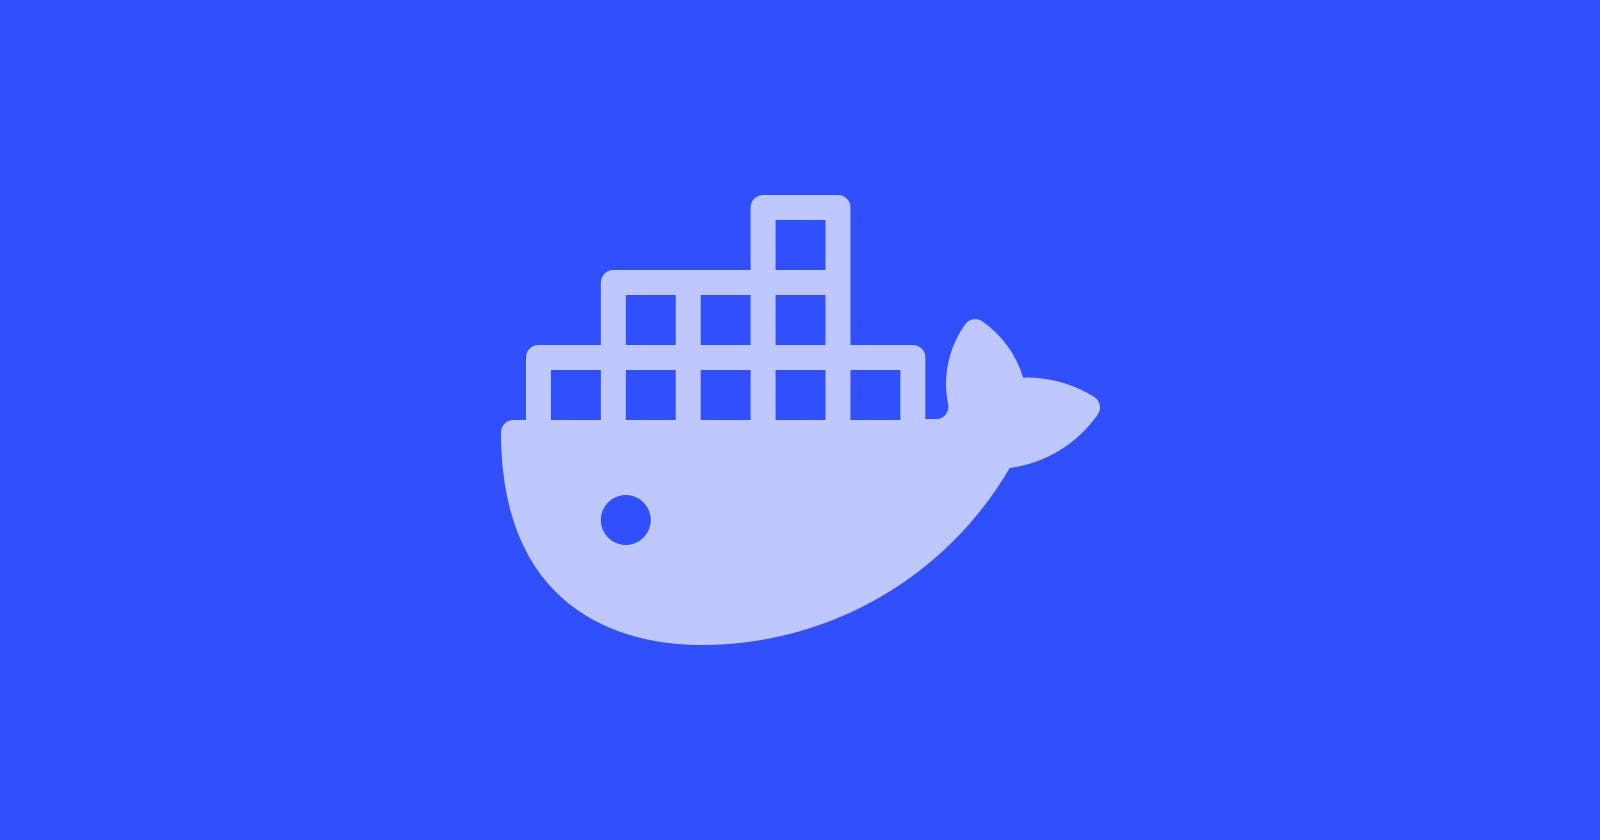 Commonly Used Docker Commands